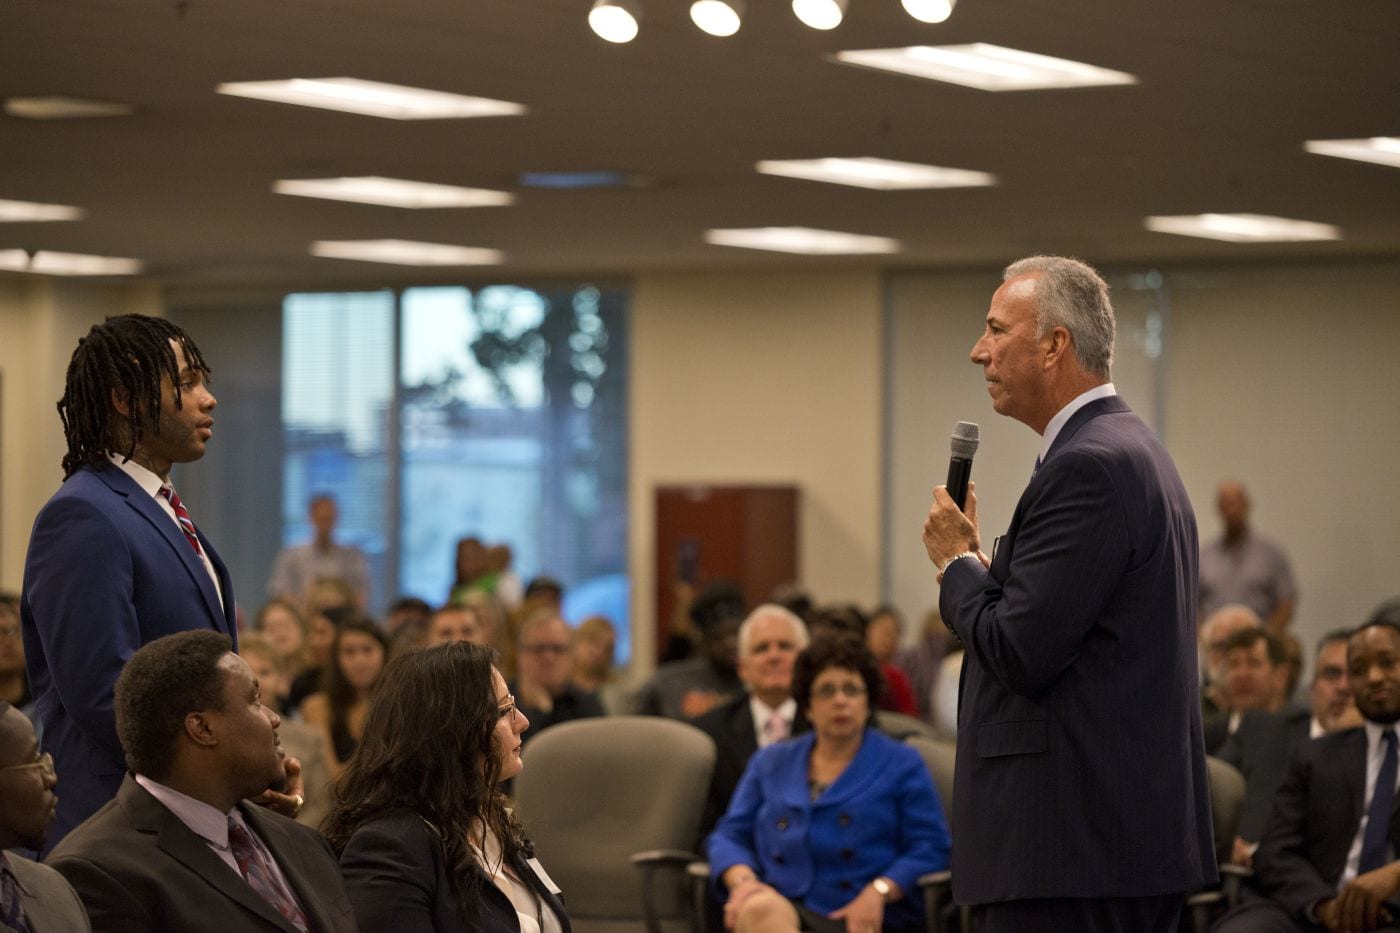 CLARK COUNTY DISTRICT ATTORNEY STEVE WOLFSON TO JOIN HOPE FOR PRISONERS BOARD OF DIRECTORS